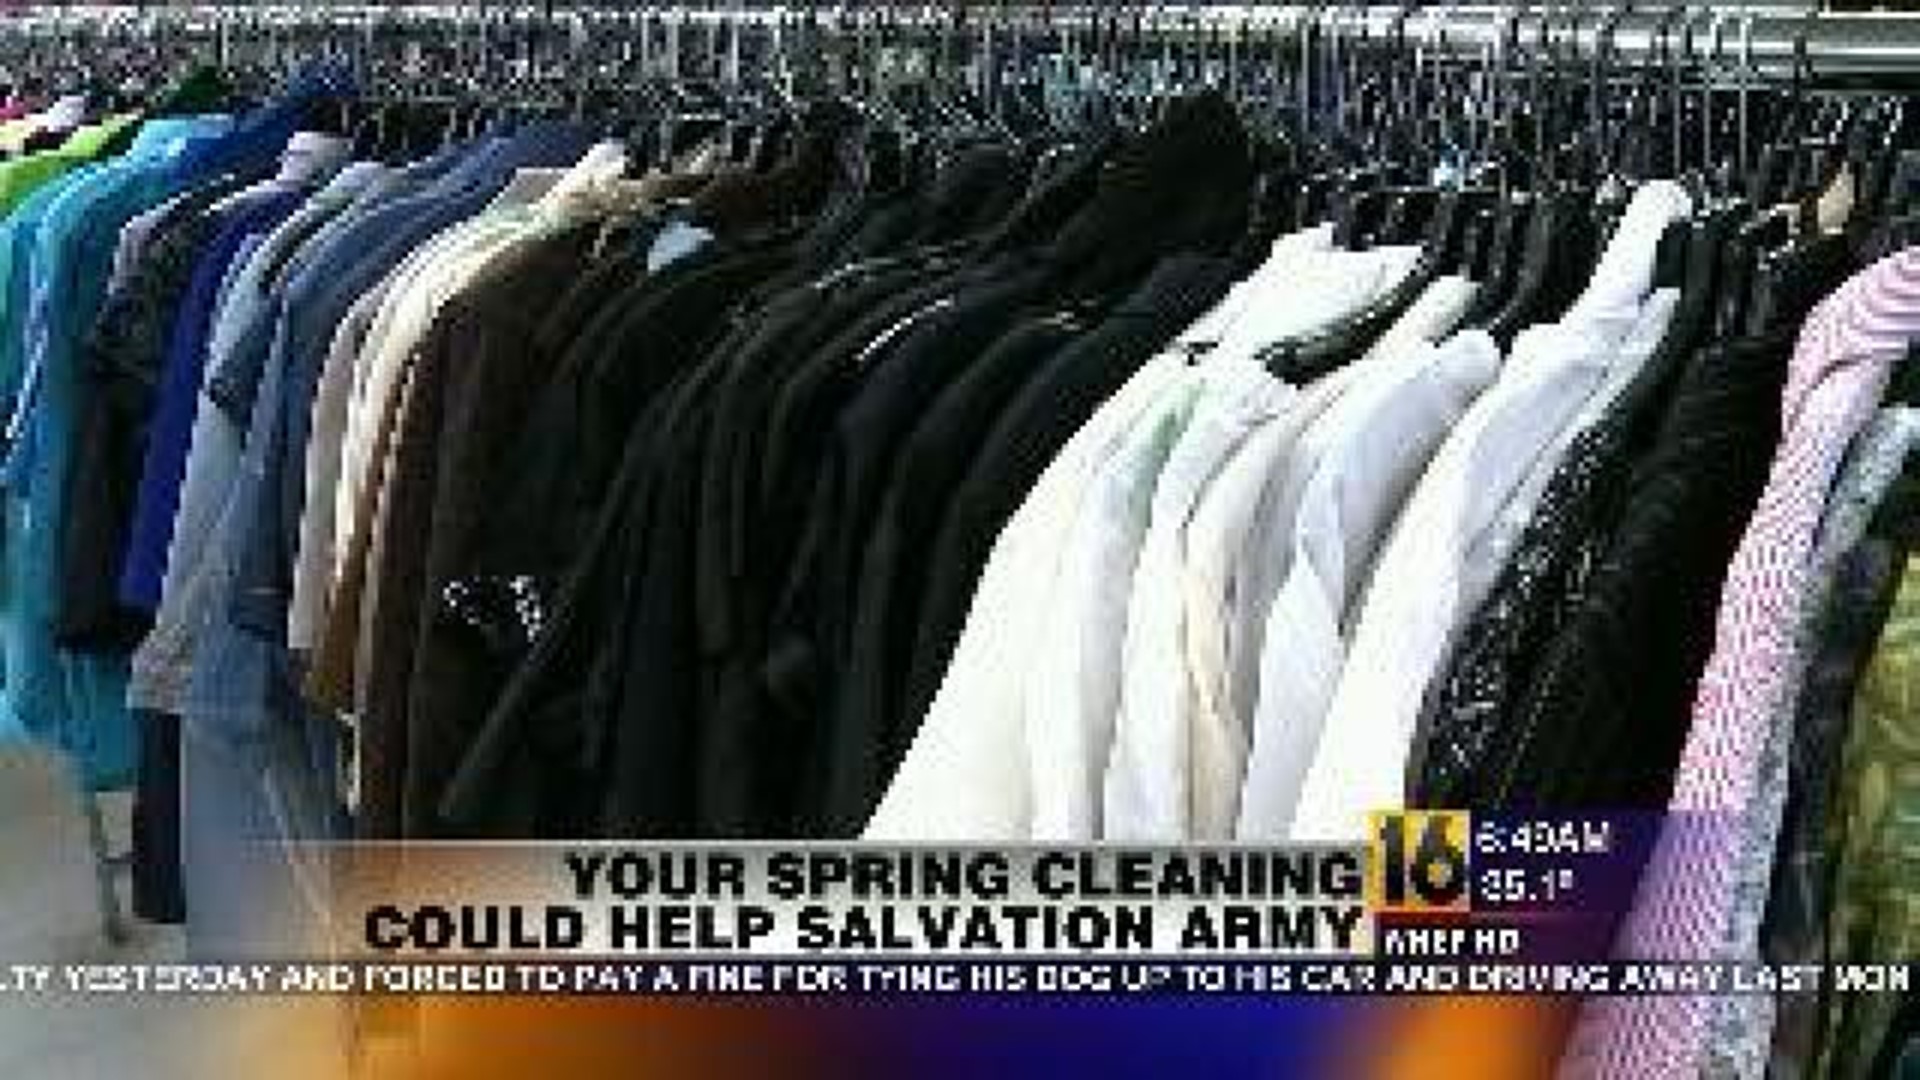 Your Spring Cleaning Could Help Salvation Army